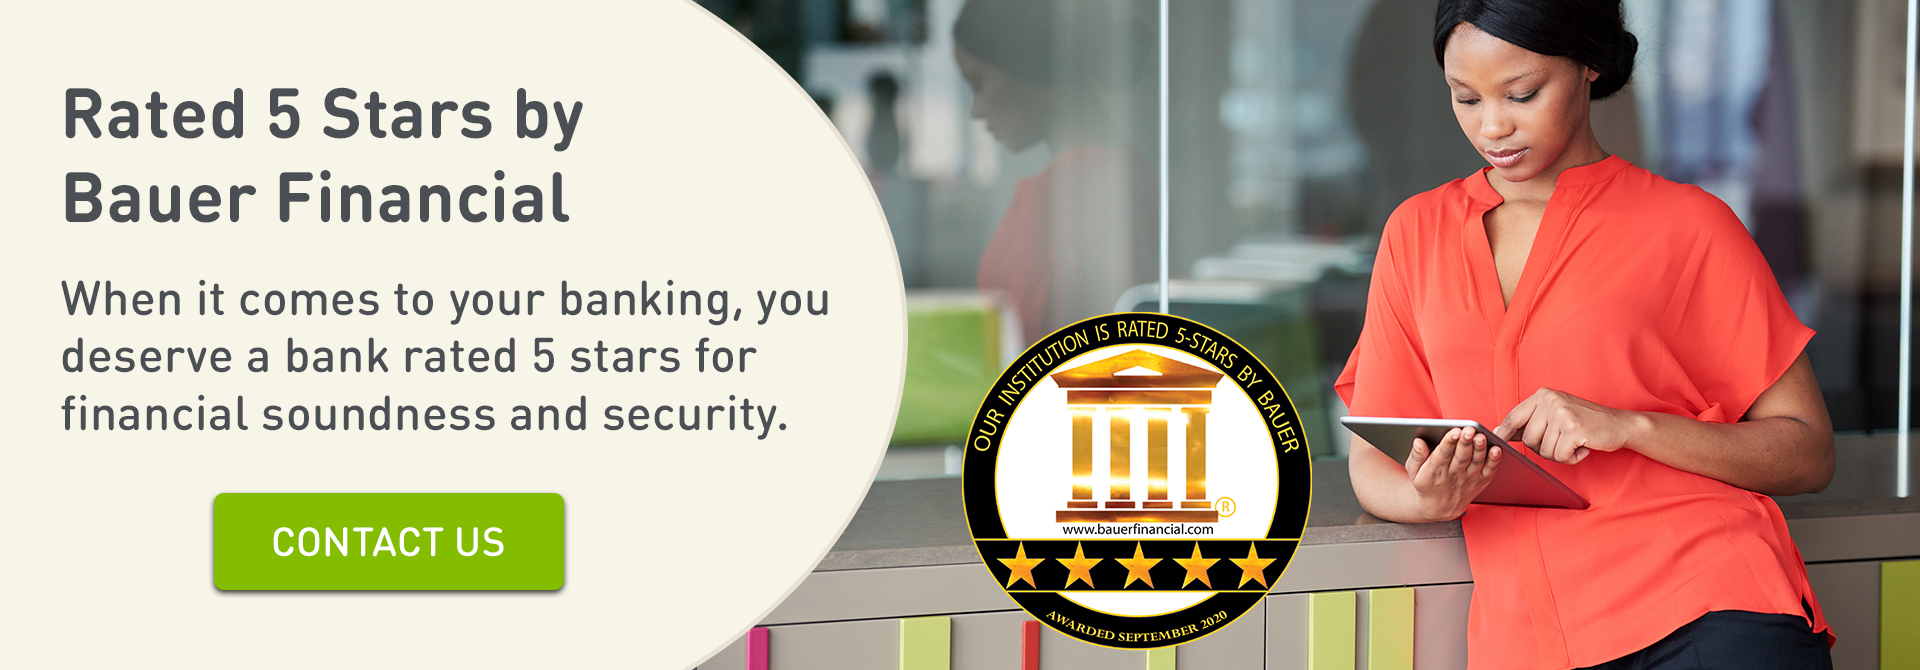 Rated 5 Stars by Bauer Financial. When it comes to your banking, you deserve a bank rated 5 stars for financial soundness and security. Click to Contact Us.